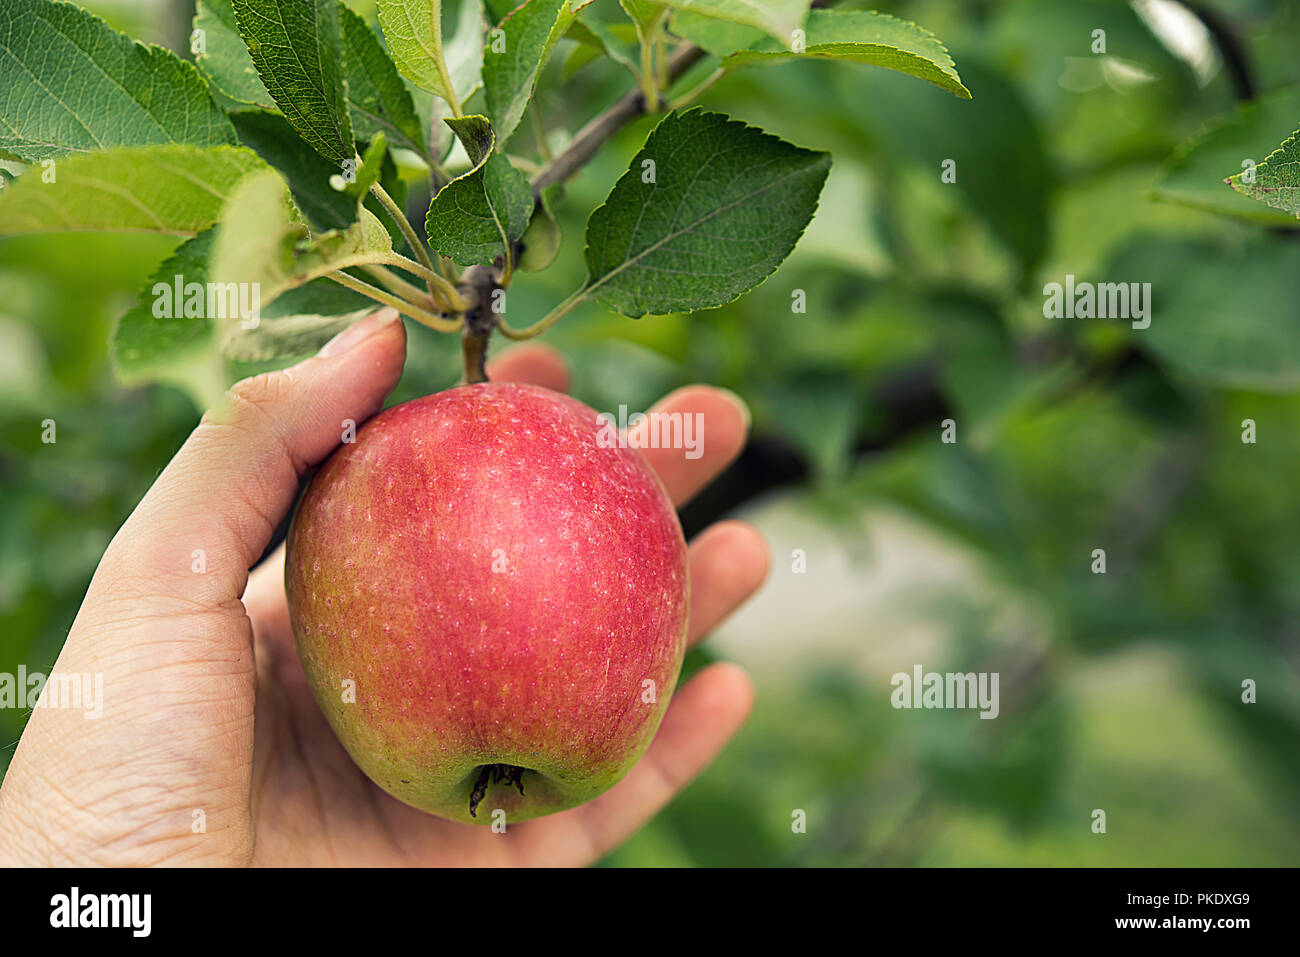 Woman's hand is holding ripe red side apple with leaves hanging on tree branch at orchard garden just before picking it. Autumn or summer harvest time Stock Photo